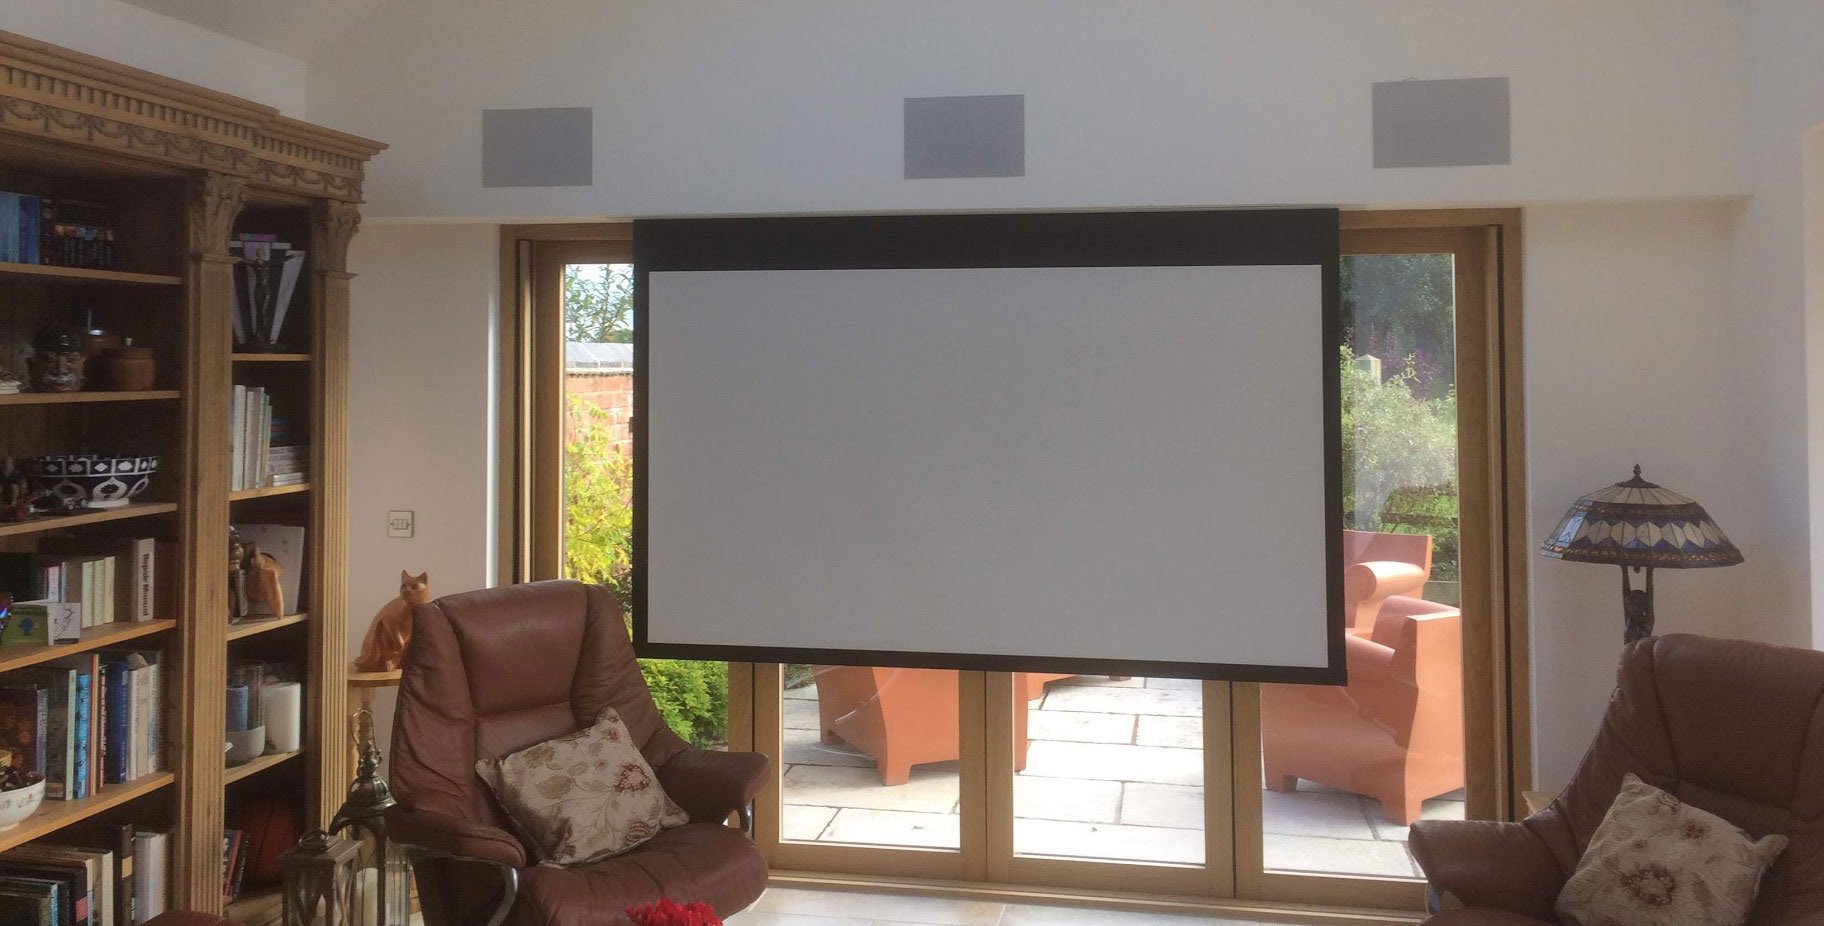 Placing a projector screen in front of windows and doors